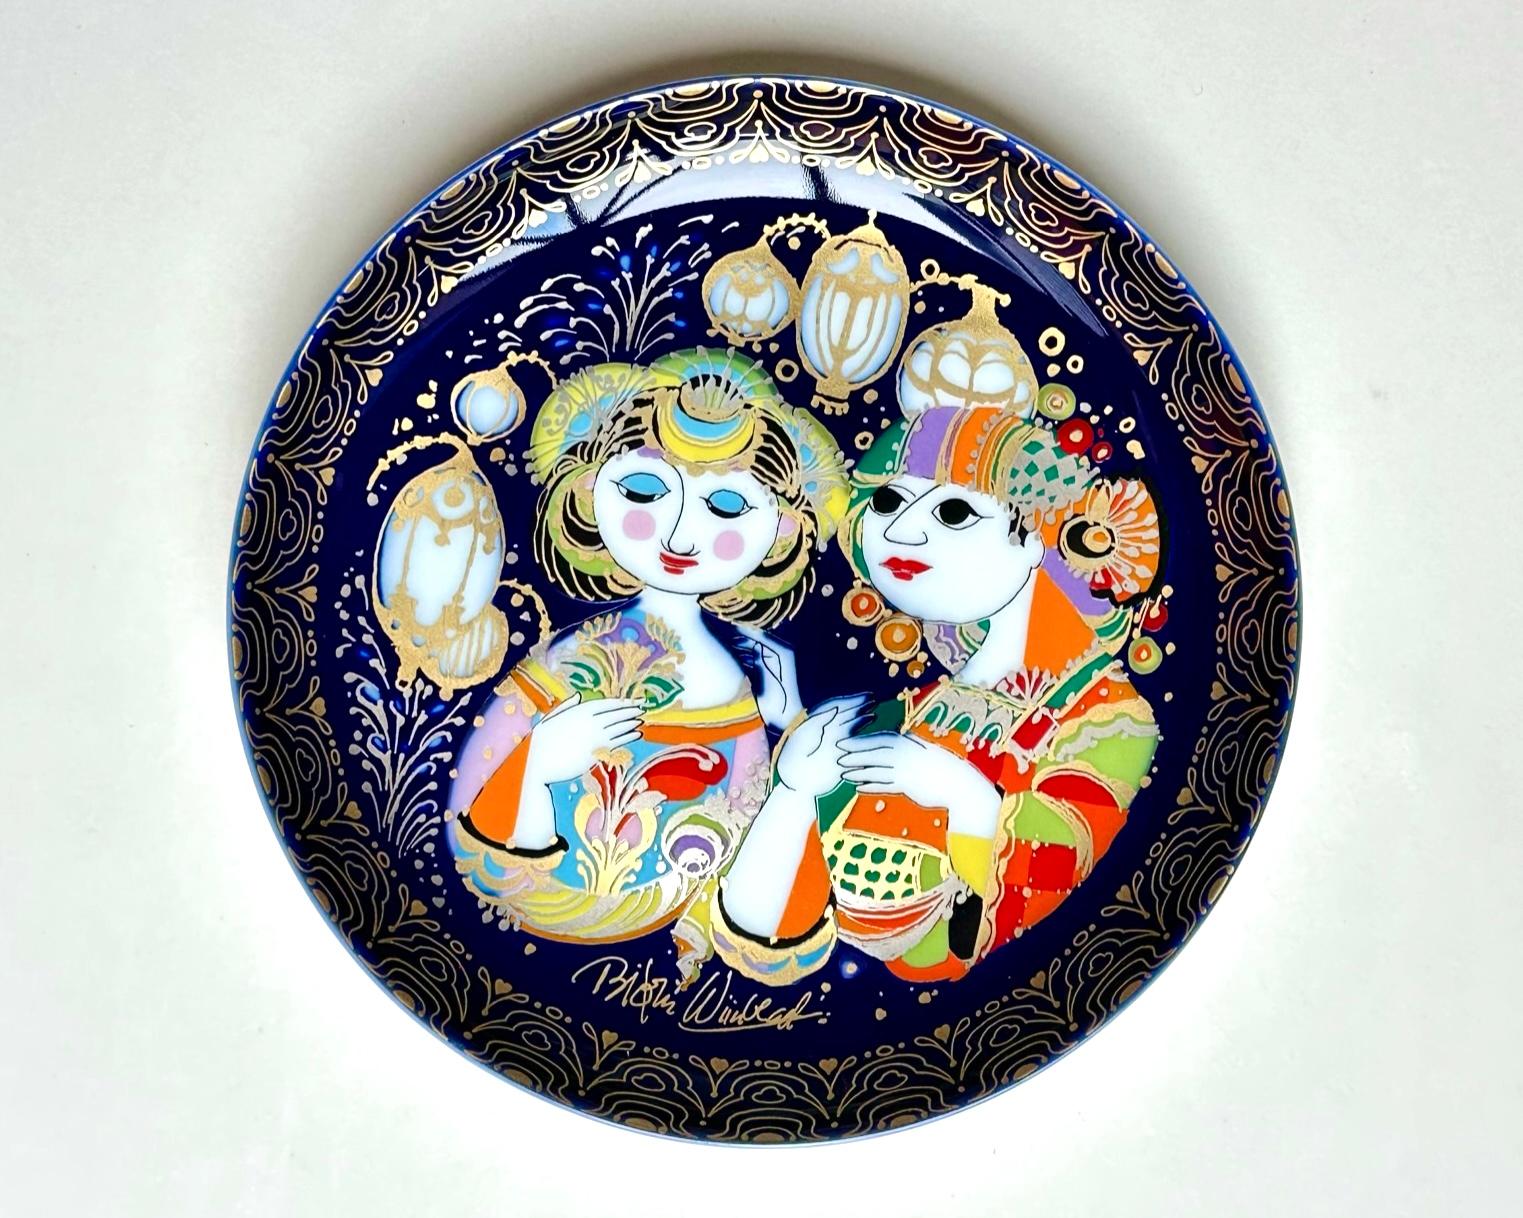 Beautiful decorative plates designed by renowned Danish artist Bjorn Wiinblad for Rosenthal.

Germany. 1970s.

Porcelain plates from the end of the 20th century based on the fairy tales «The Thousand and One Nights». (Nights of